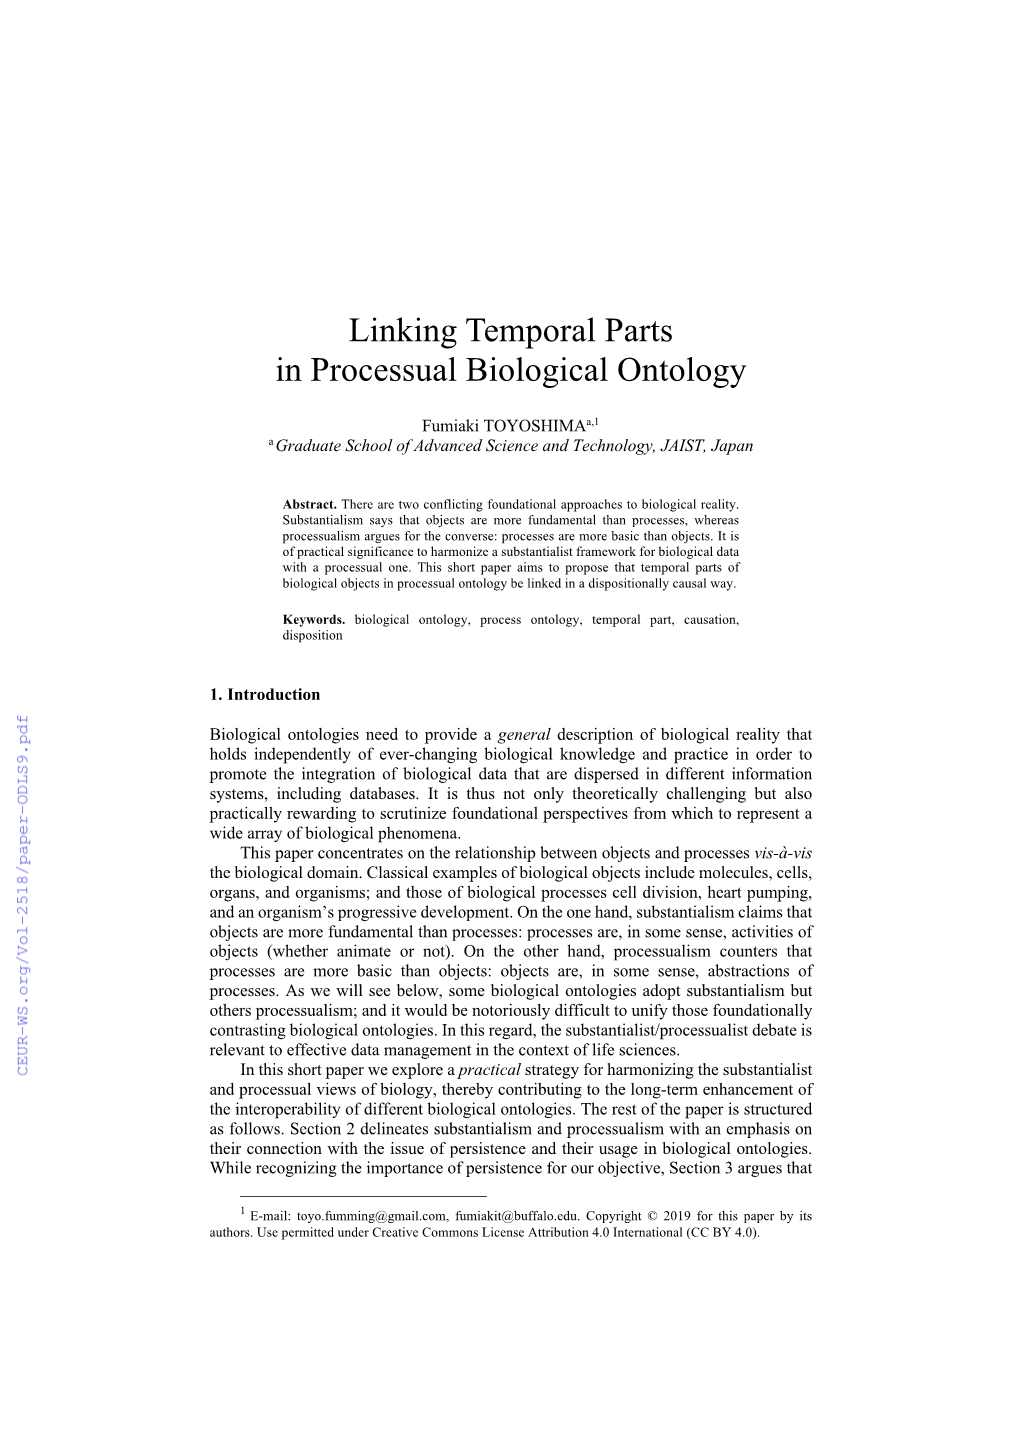 Linking Temporal Parts in Processual Biological Ontology